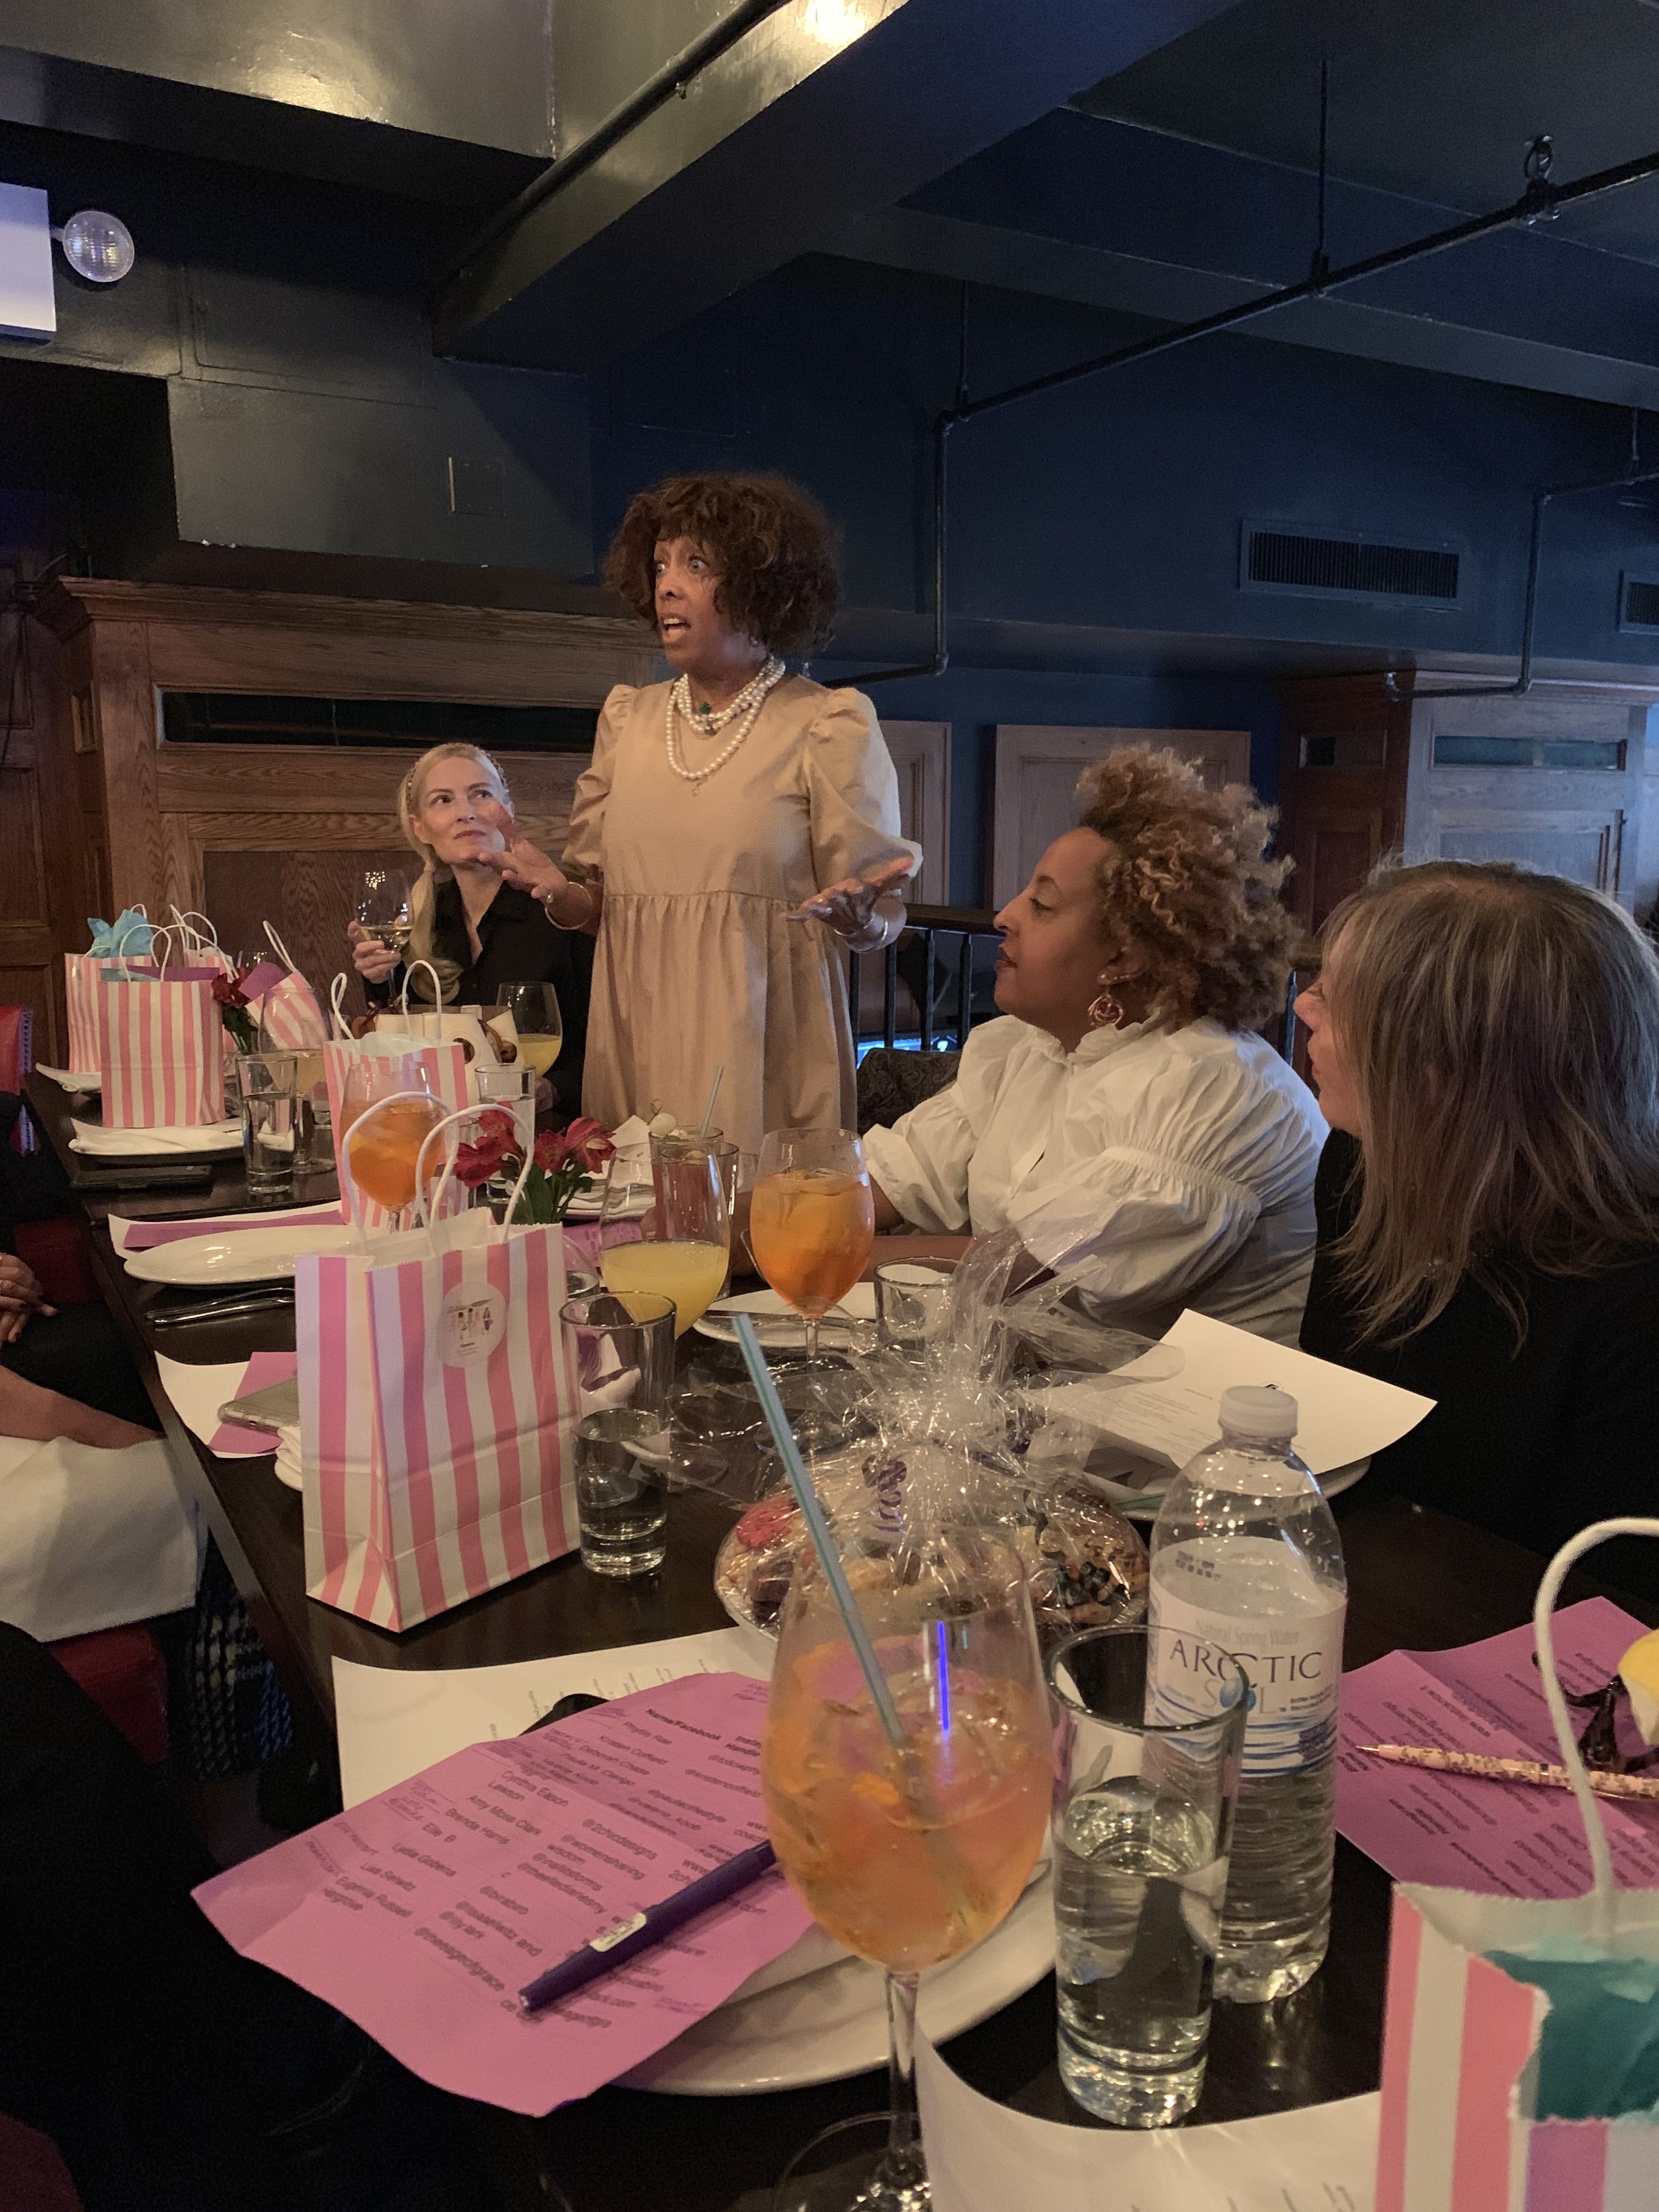 Brenda Harris, The New Yorker attended the Fierce Con NYC Brunch